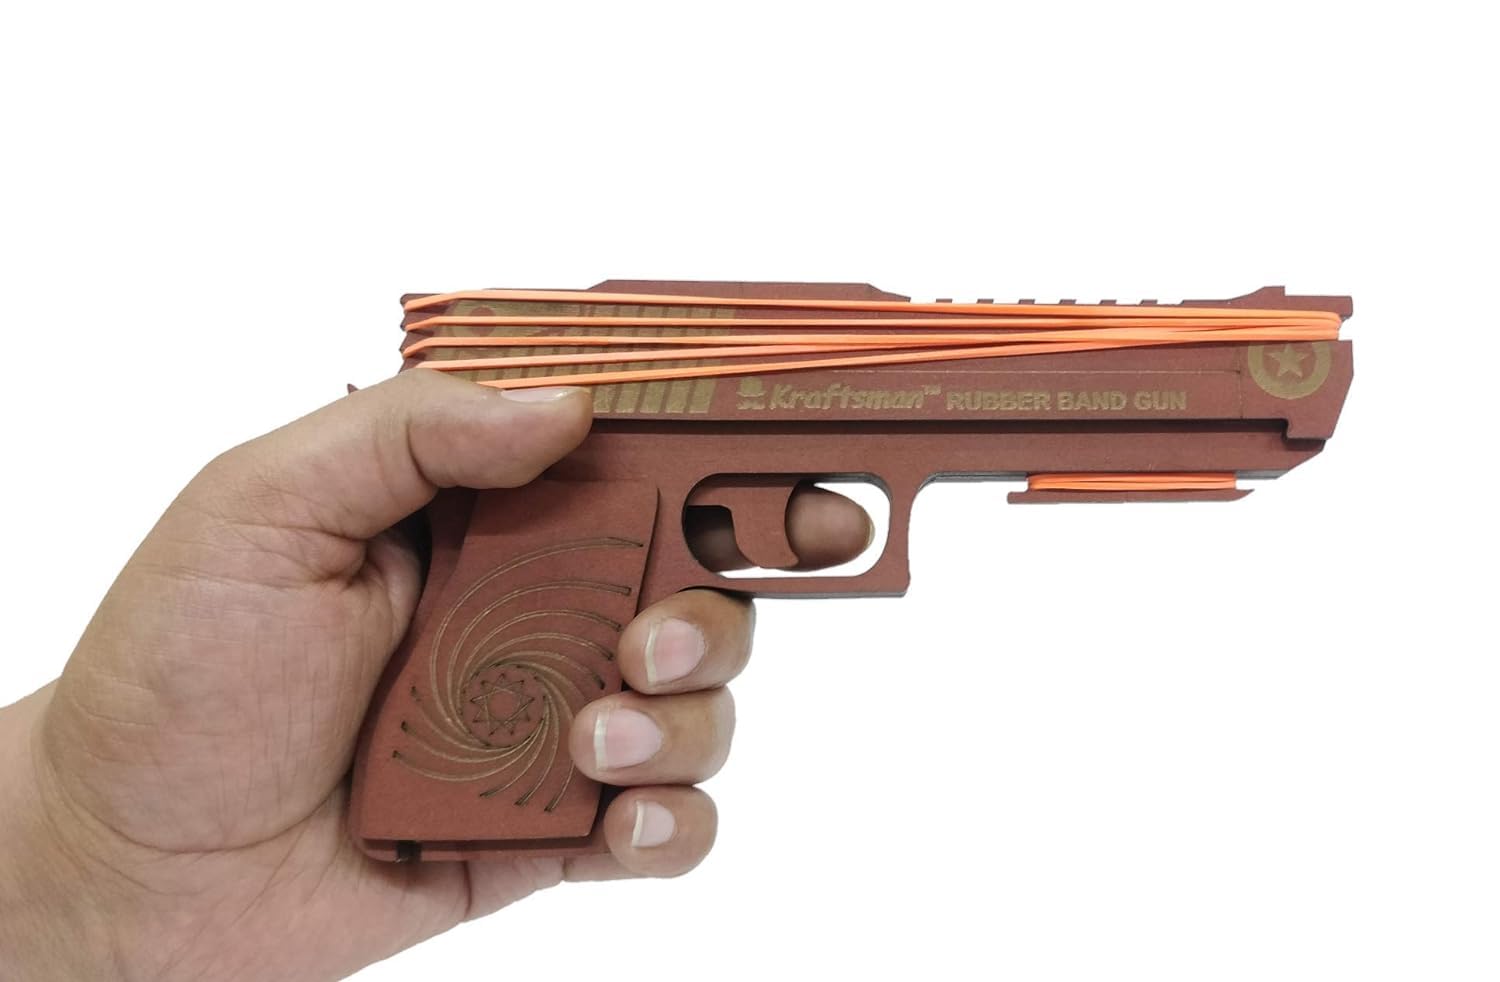 Braintastic Wooden Semi-Automatic Rubber Band Shooting Gun Toys with 5 Rapid Fire Shots for Kids (Brown)